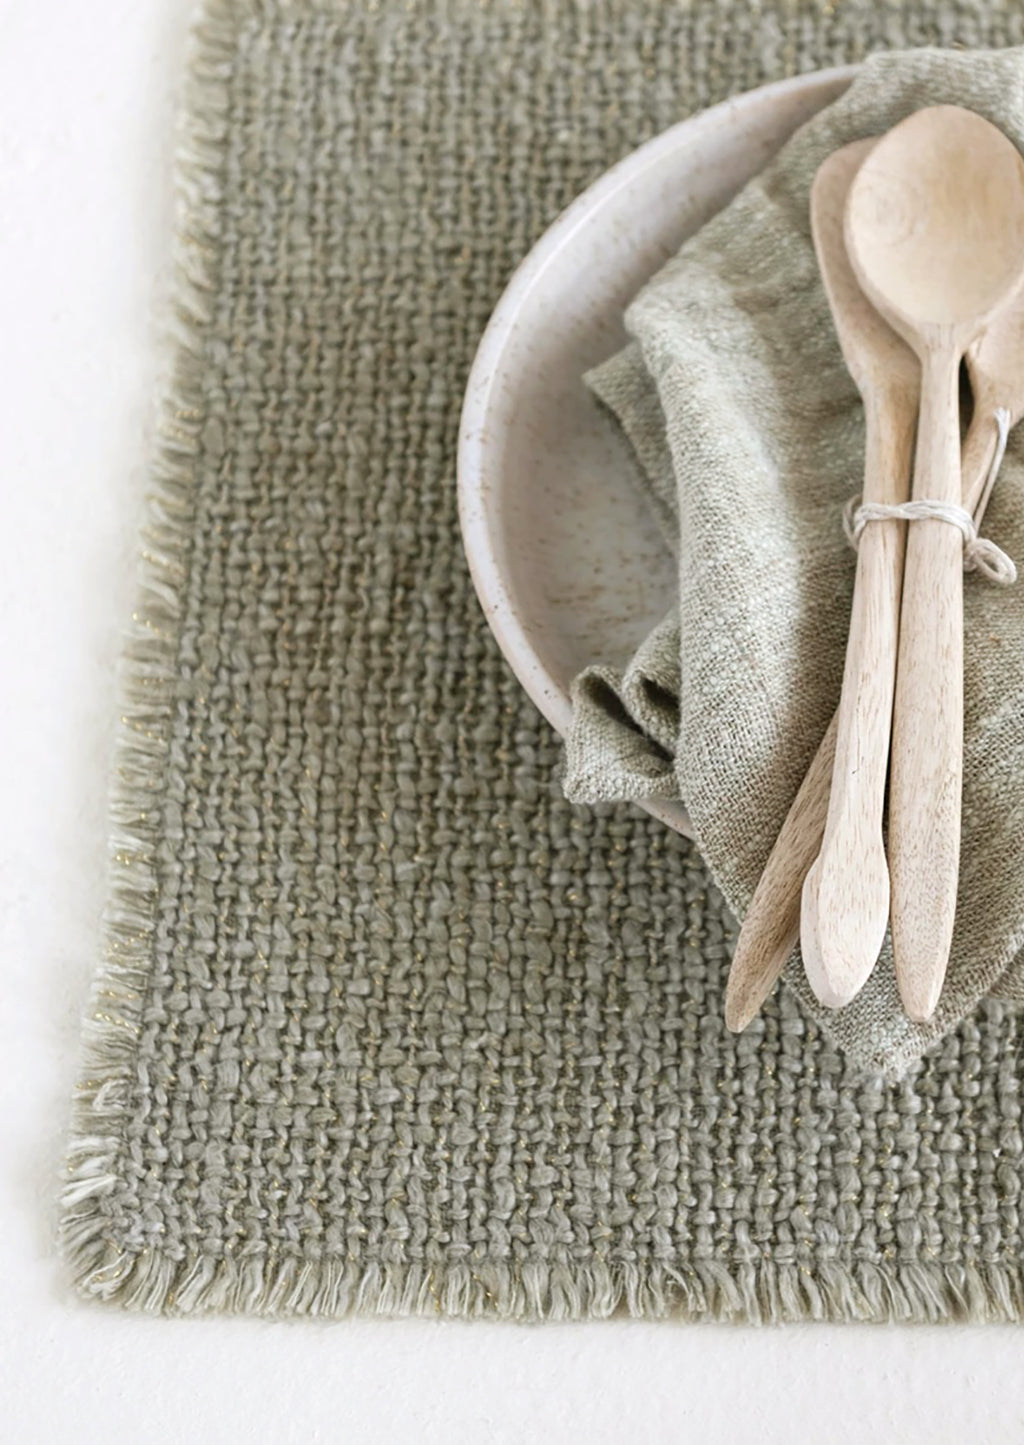 4: A sage green placemat with fringe edges.